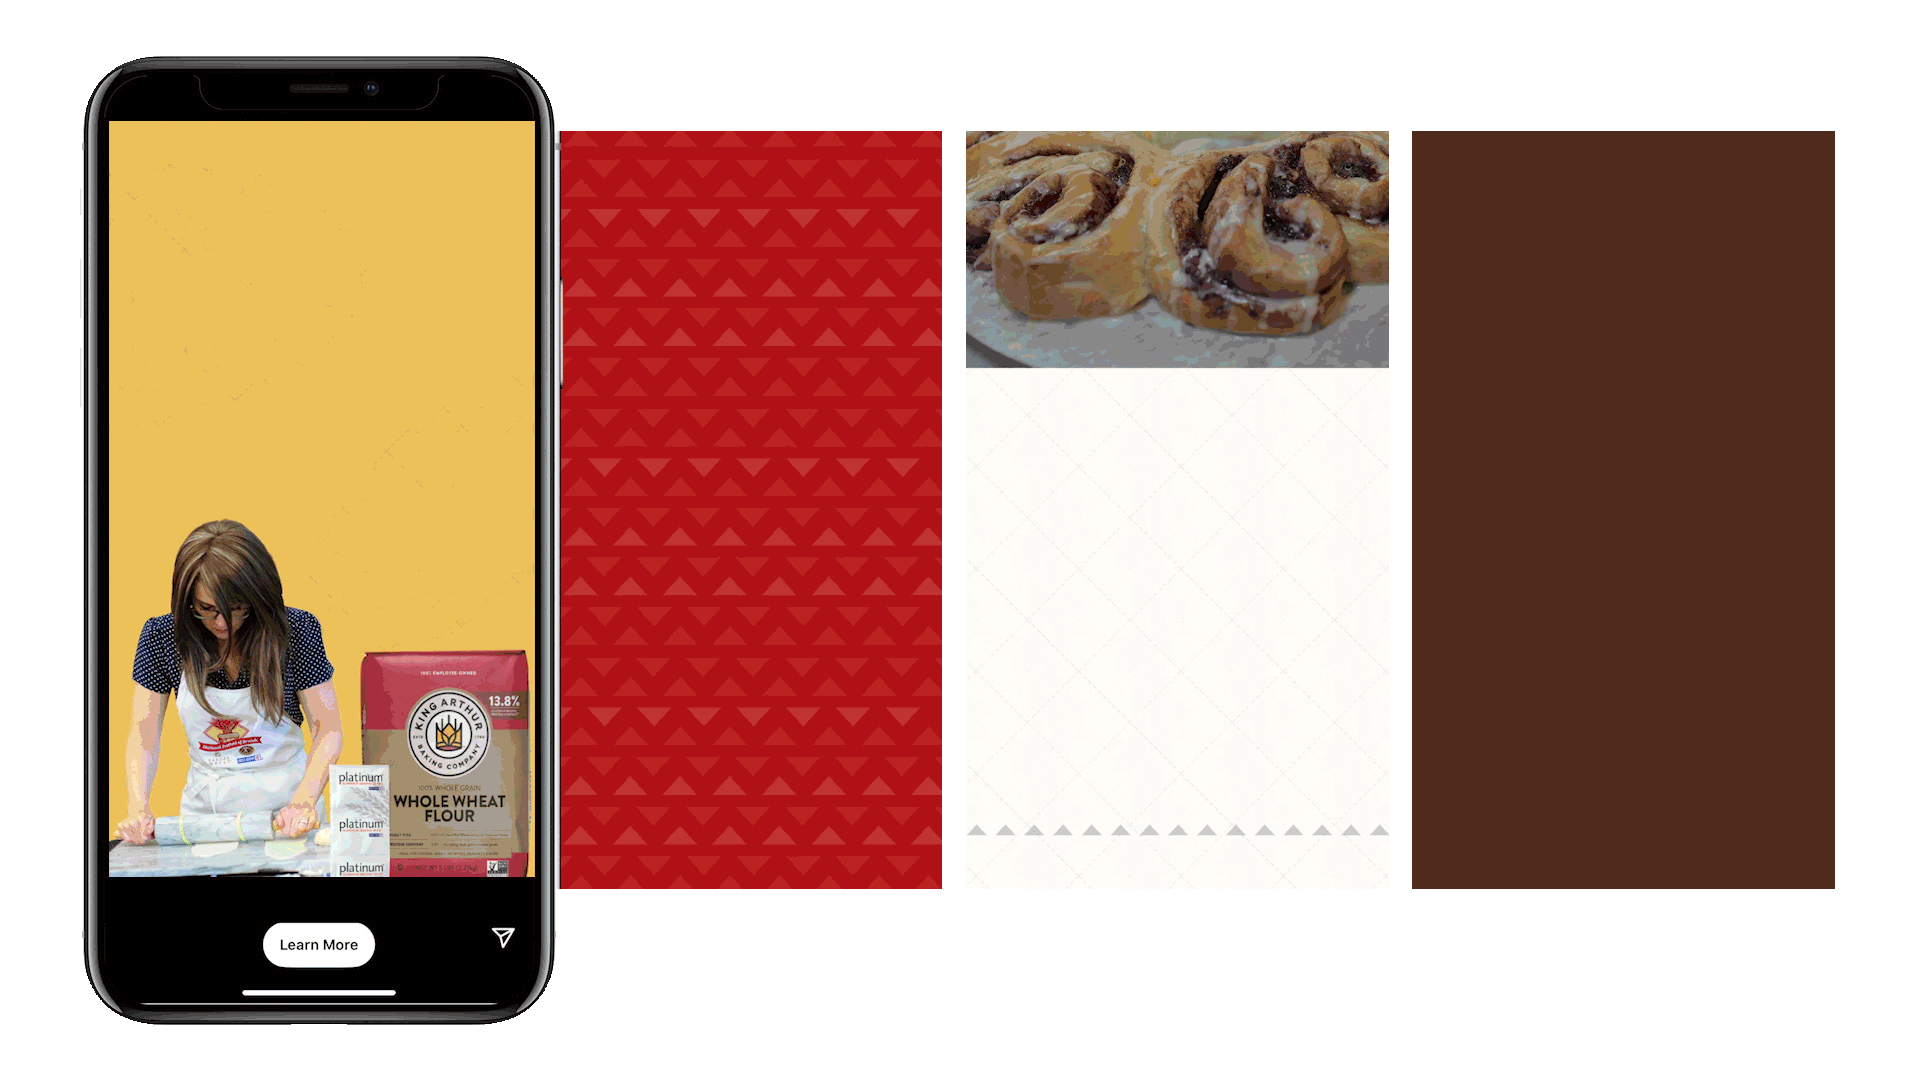 National Festival of Breads animated phone ads